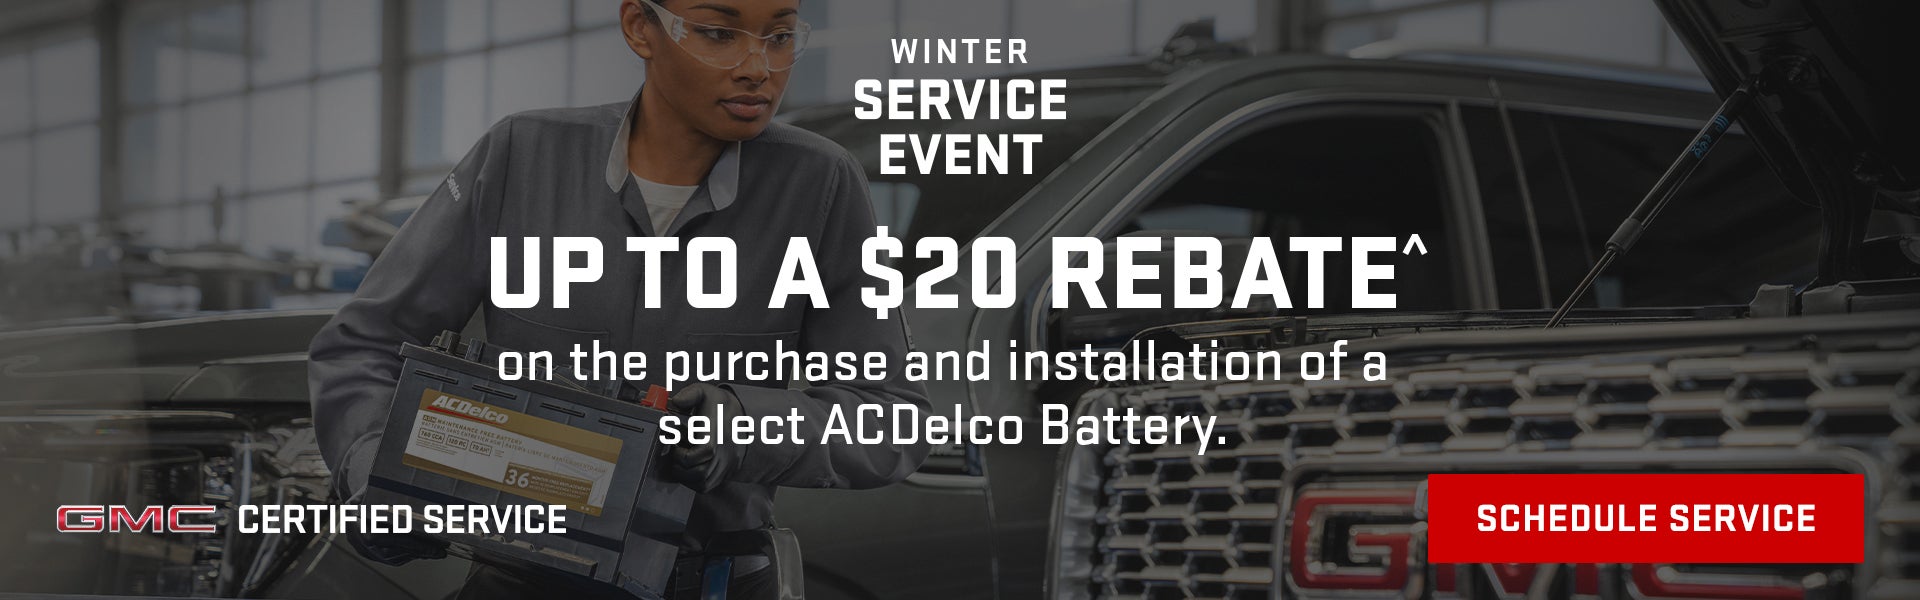 Winter Service Event Up to a $20 rebate